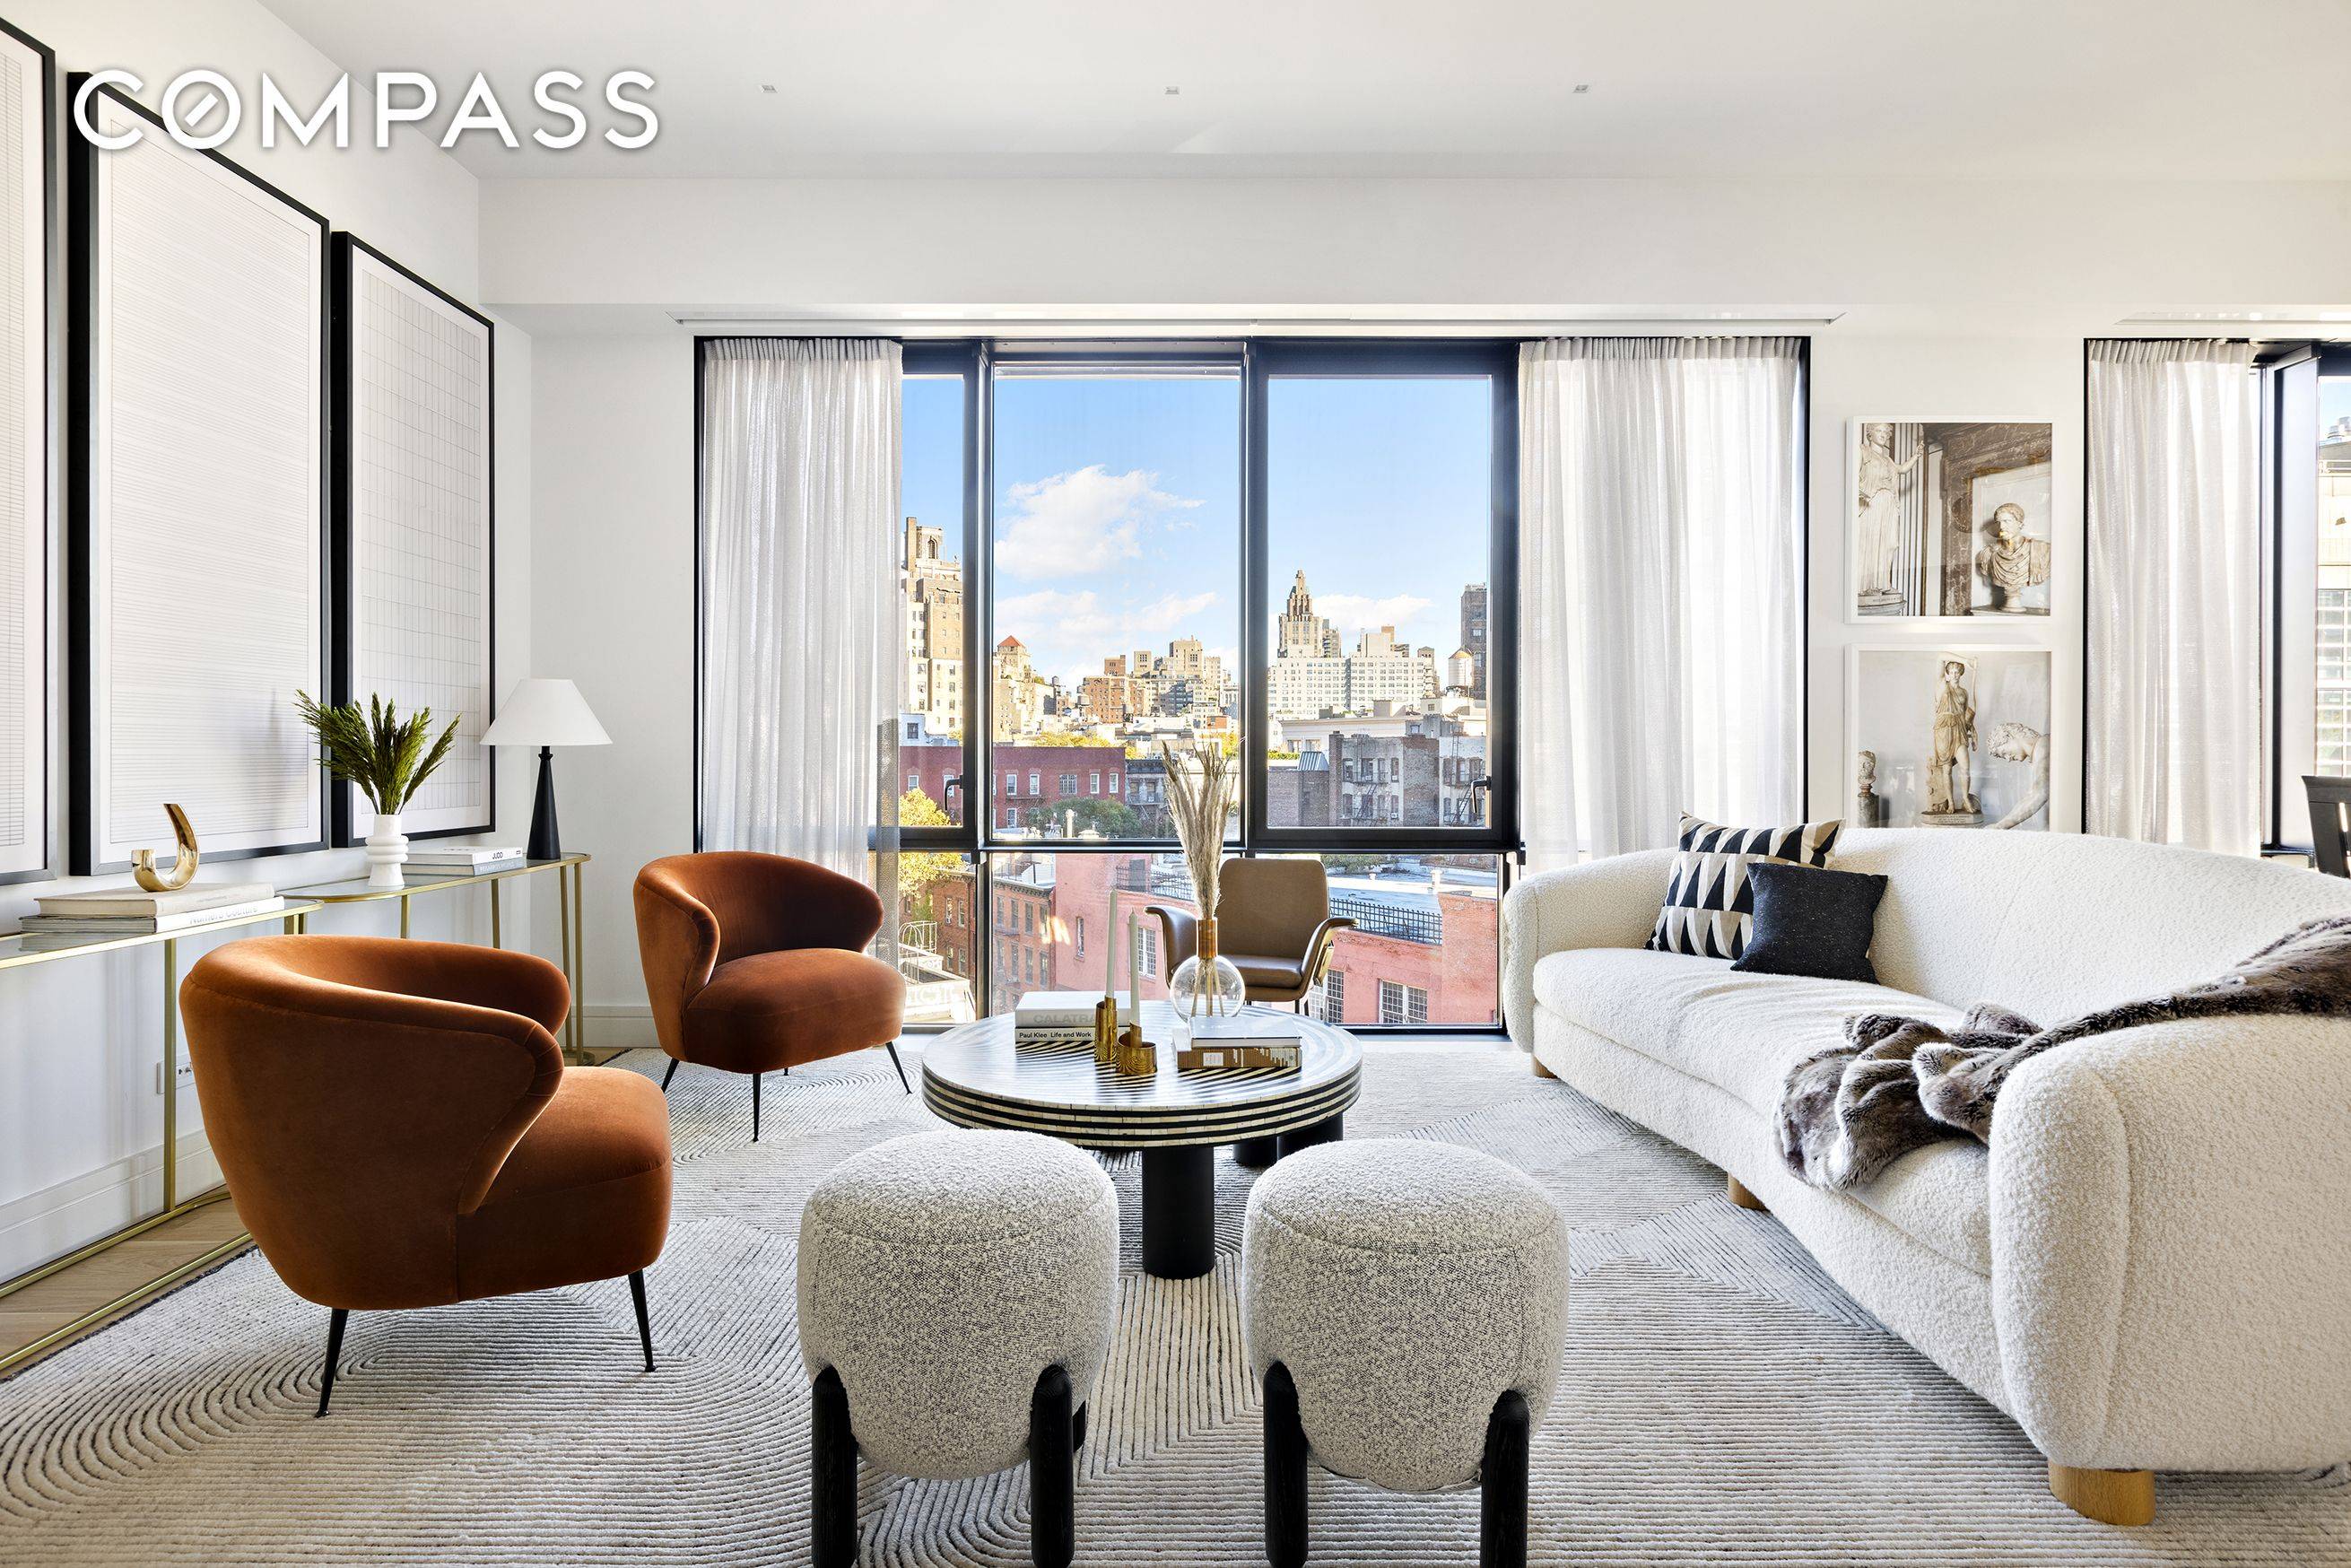 An ultra luxurious duplex penthouse awaits the discerning buyer, resting atop the boutique condominium 175 West 10th Street in the heart of the West Village.